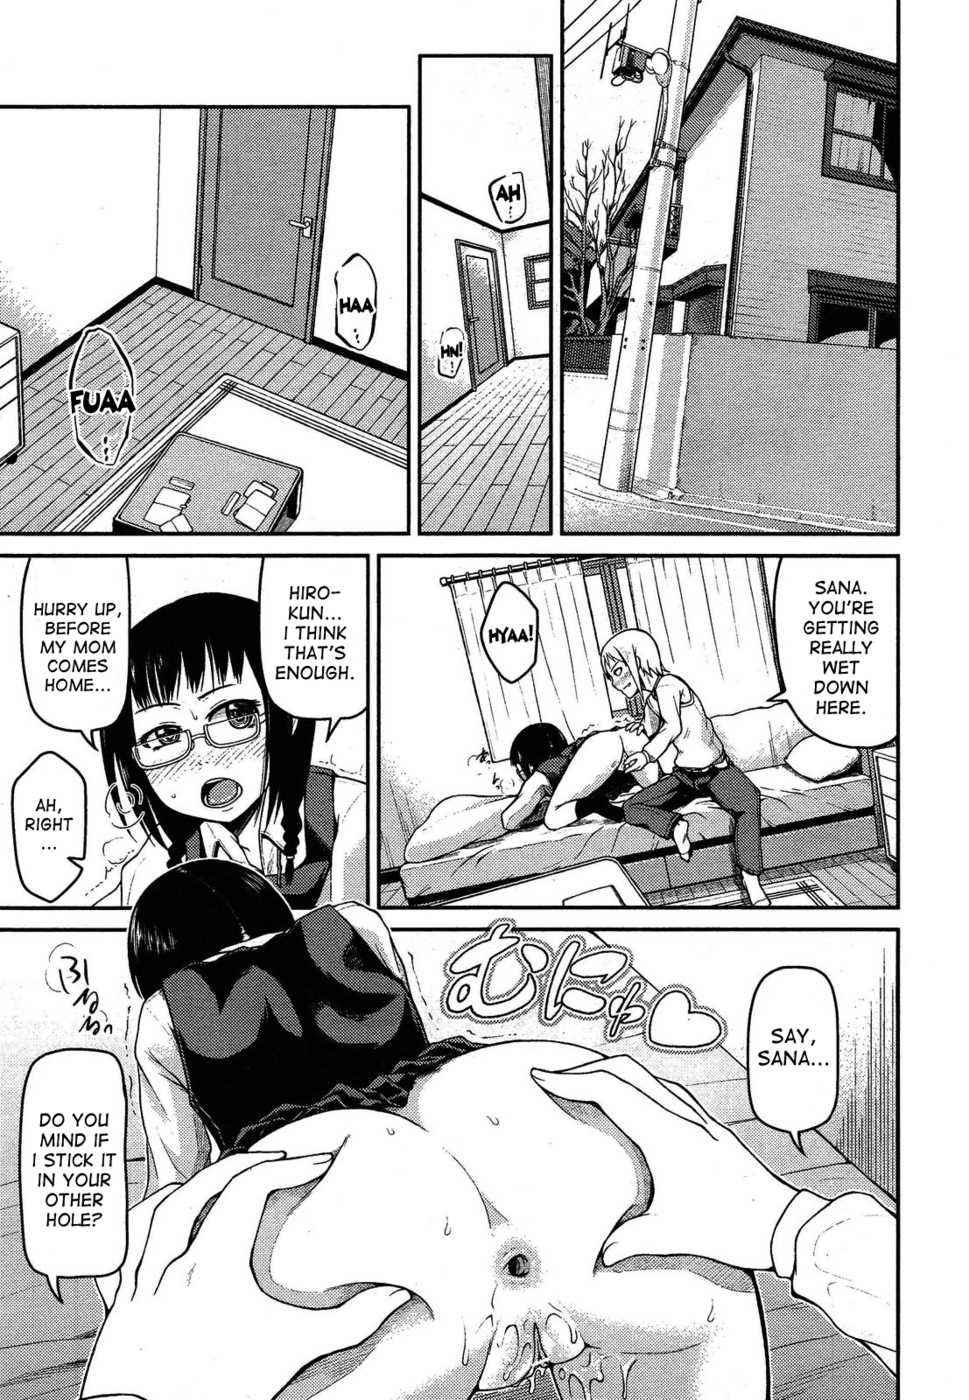 Bocah Cilik Ngentot Tante - Let's Have Anal!-Read-Hentai Manga Hentai Comic - Page: 1 - Online porn  video at mobile